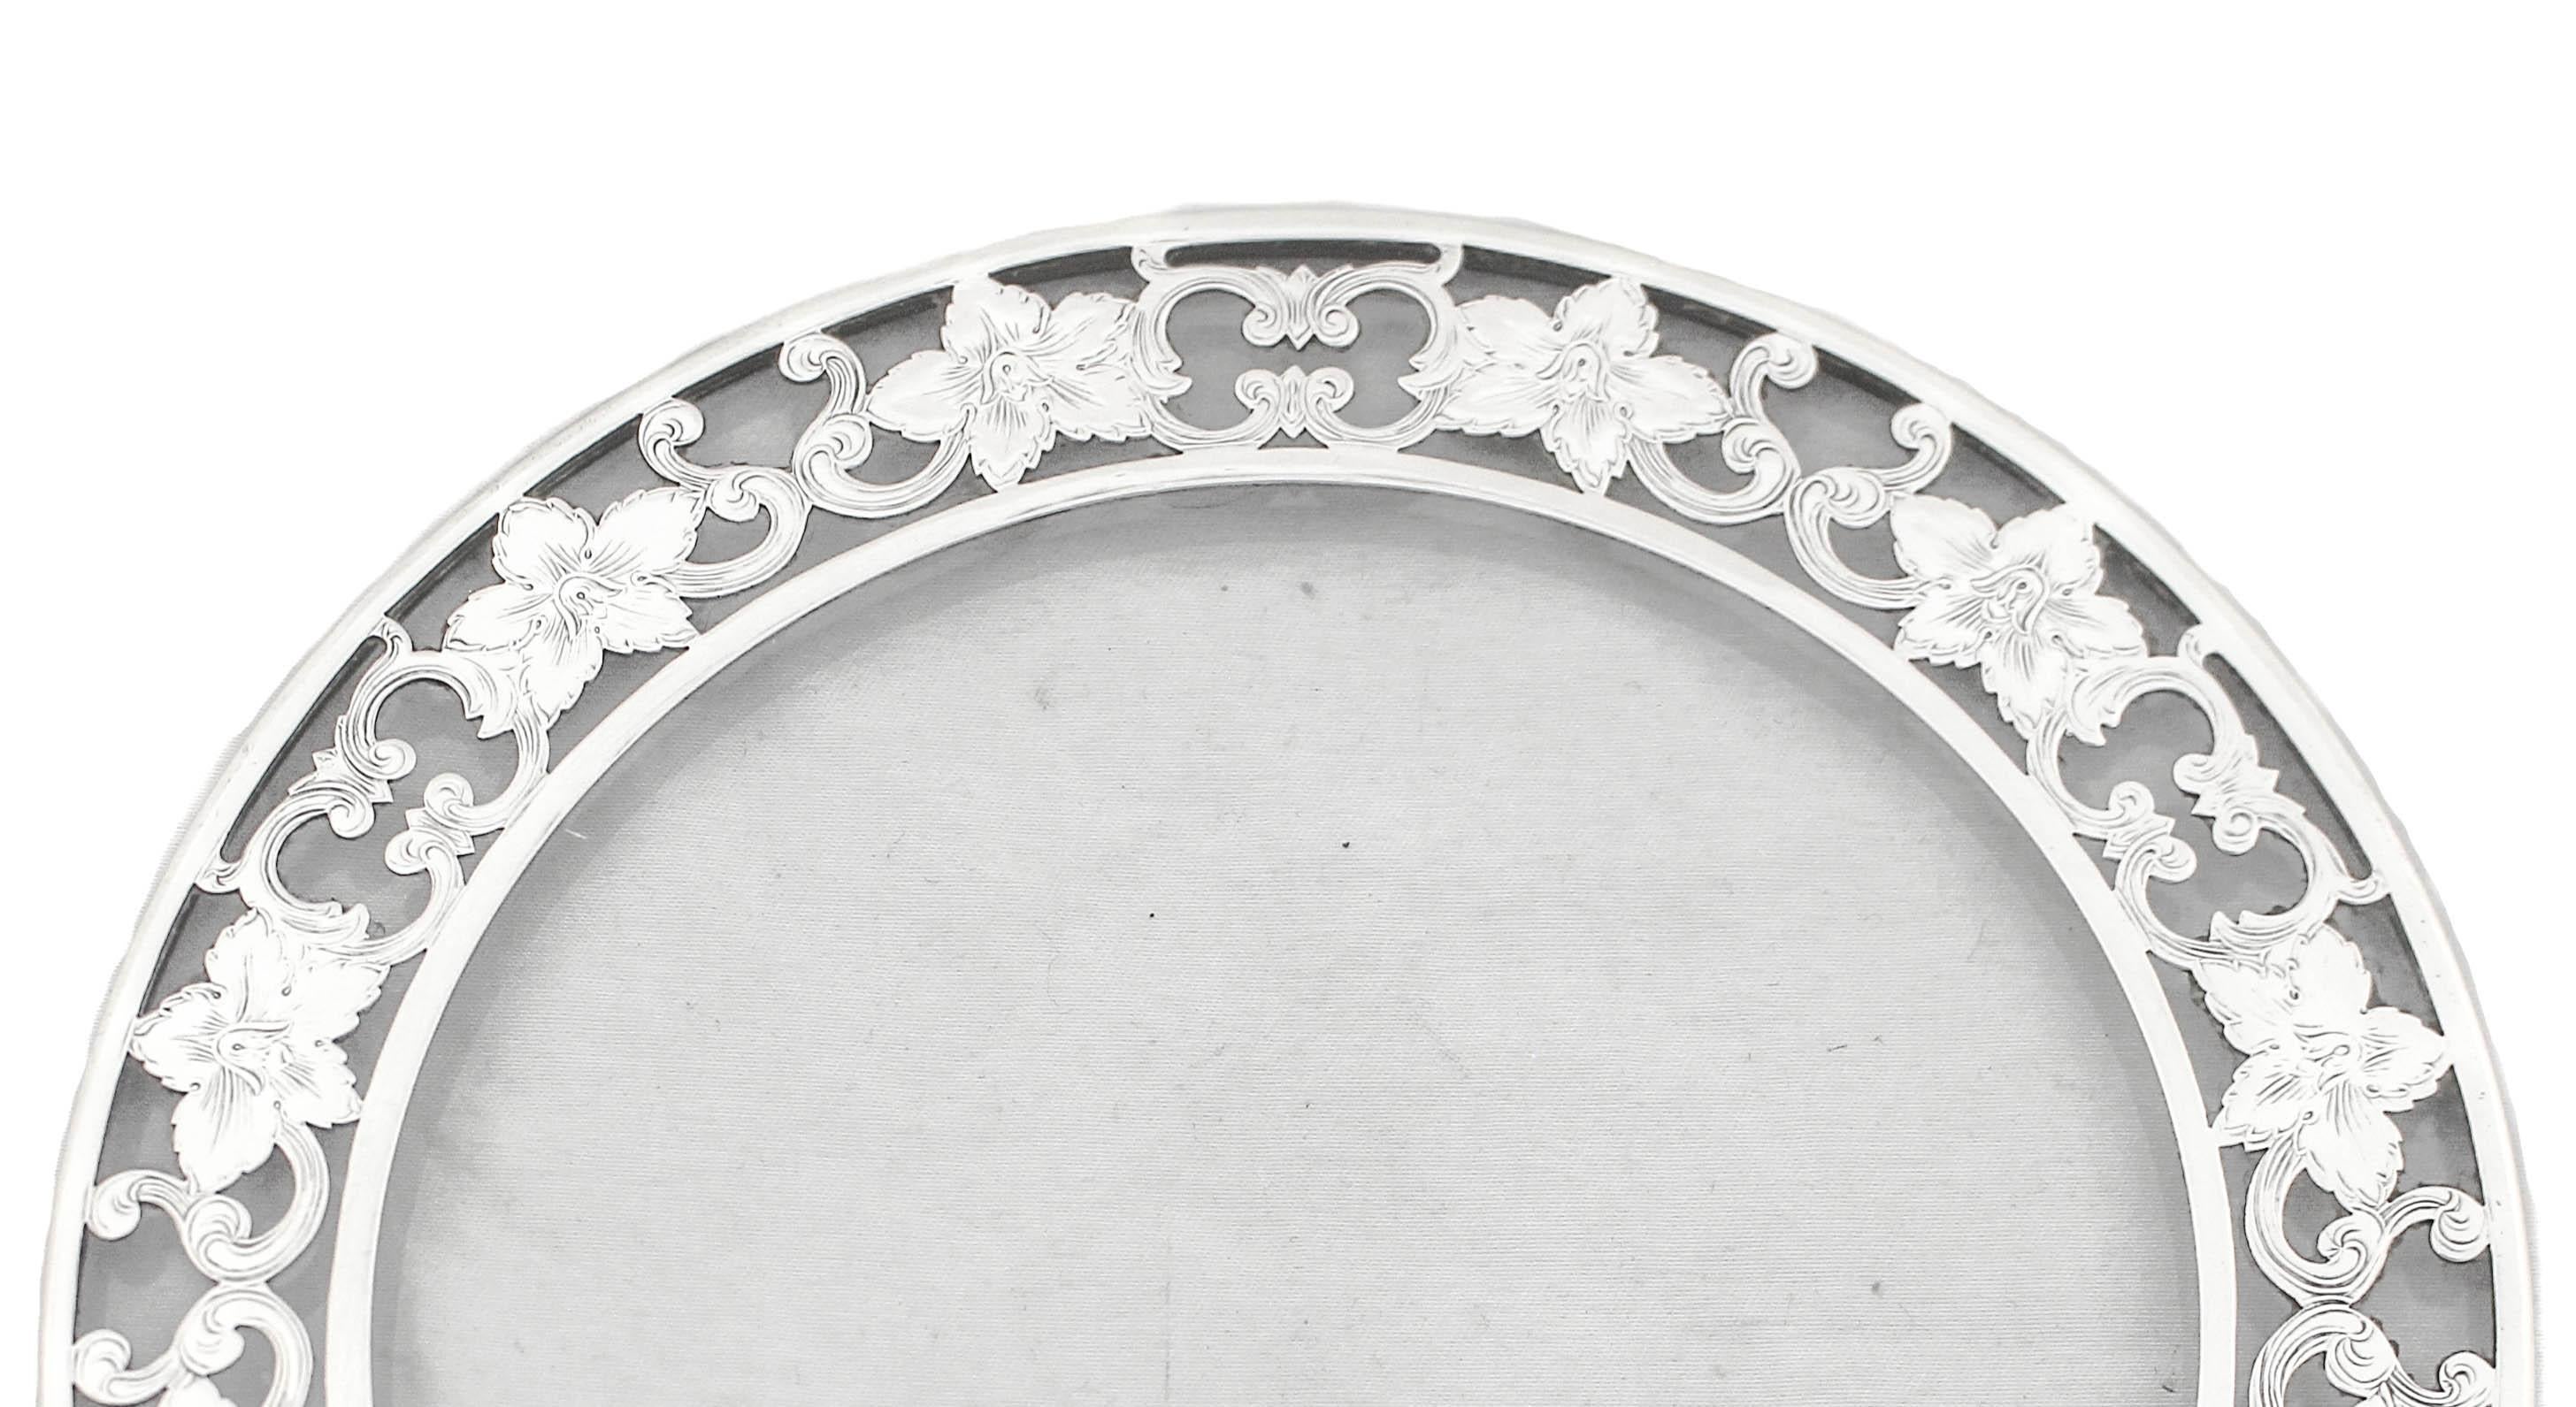 Being offered is a sterling silver trivet with overlay glass. A lovely floral motif decorated the edge and folds over the rim.  A great piece to put under a vase or perfume bottles on …of course, to use as a trivet when serving food.